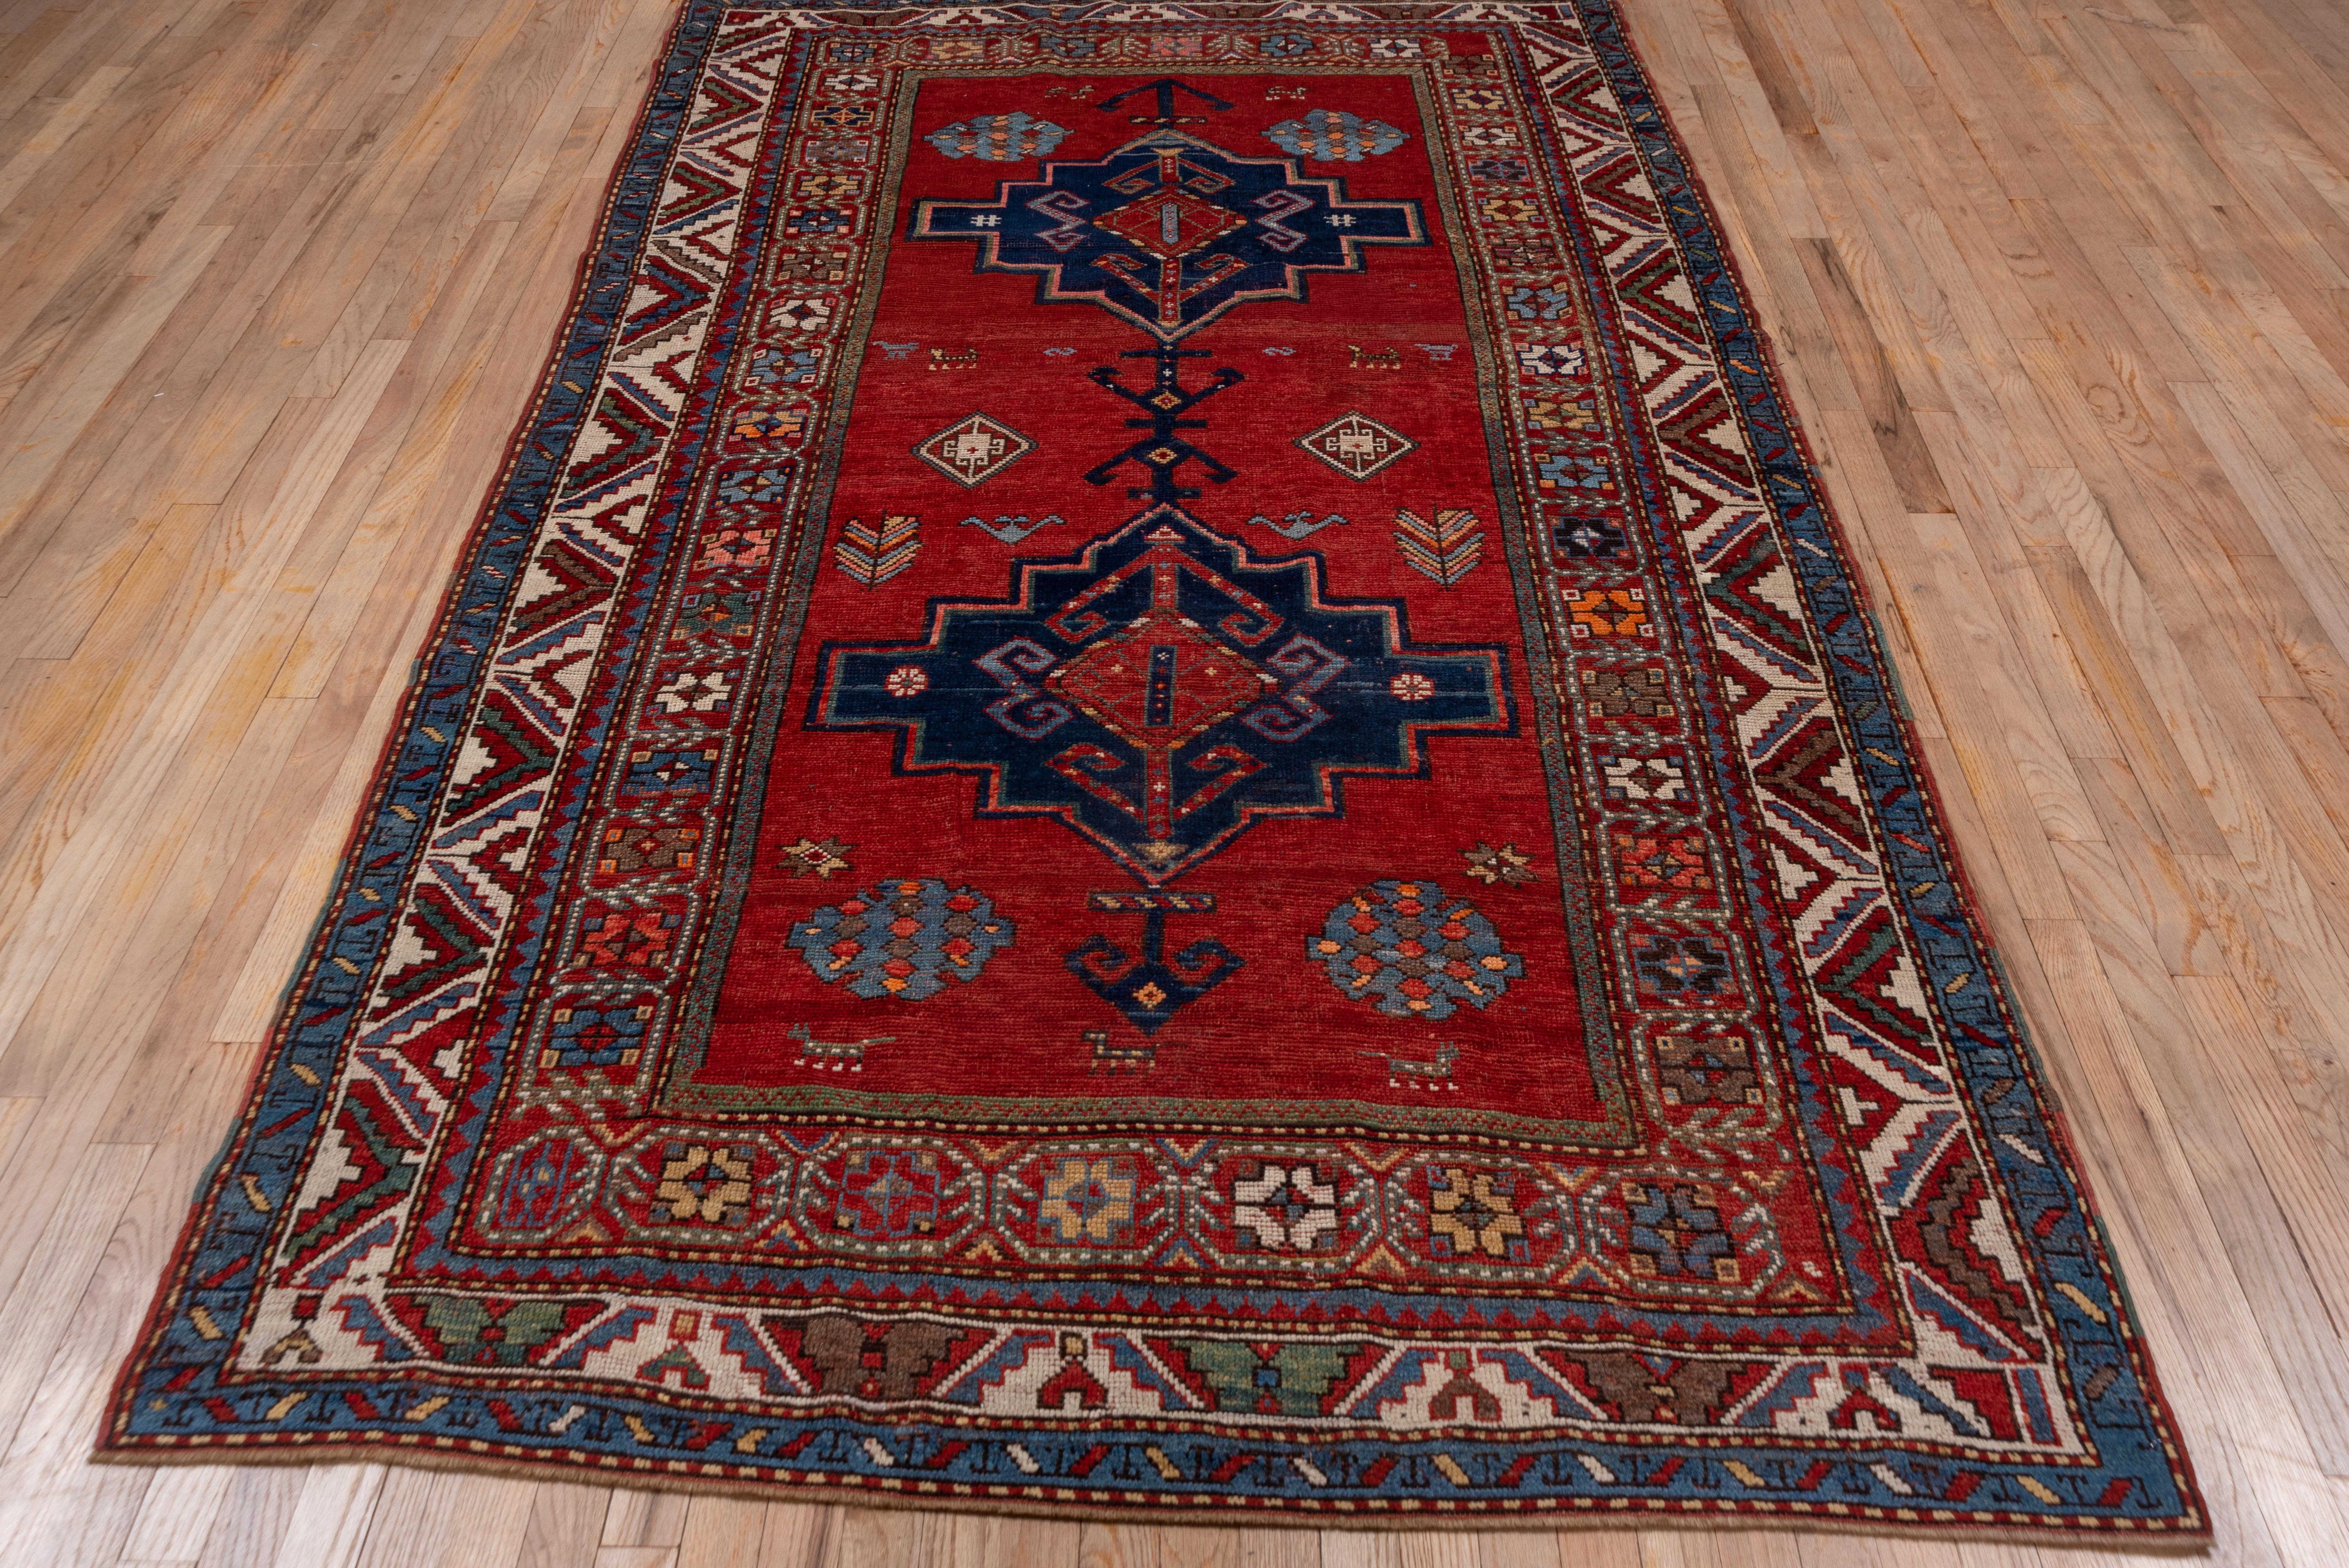 The saturated madder red field of this rug displays two large stepped and pointed royal blue medallions with red voluted centres. Scattered around are tiny animals, complex rosettes, stars, feathery plants and dark brown 